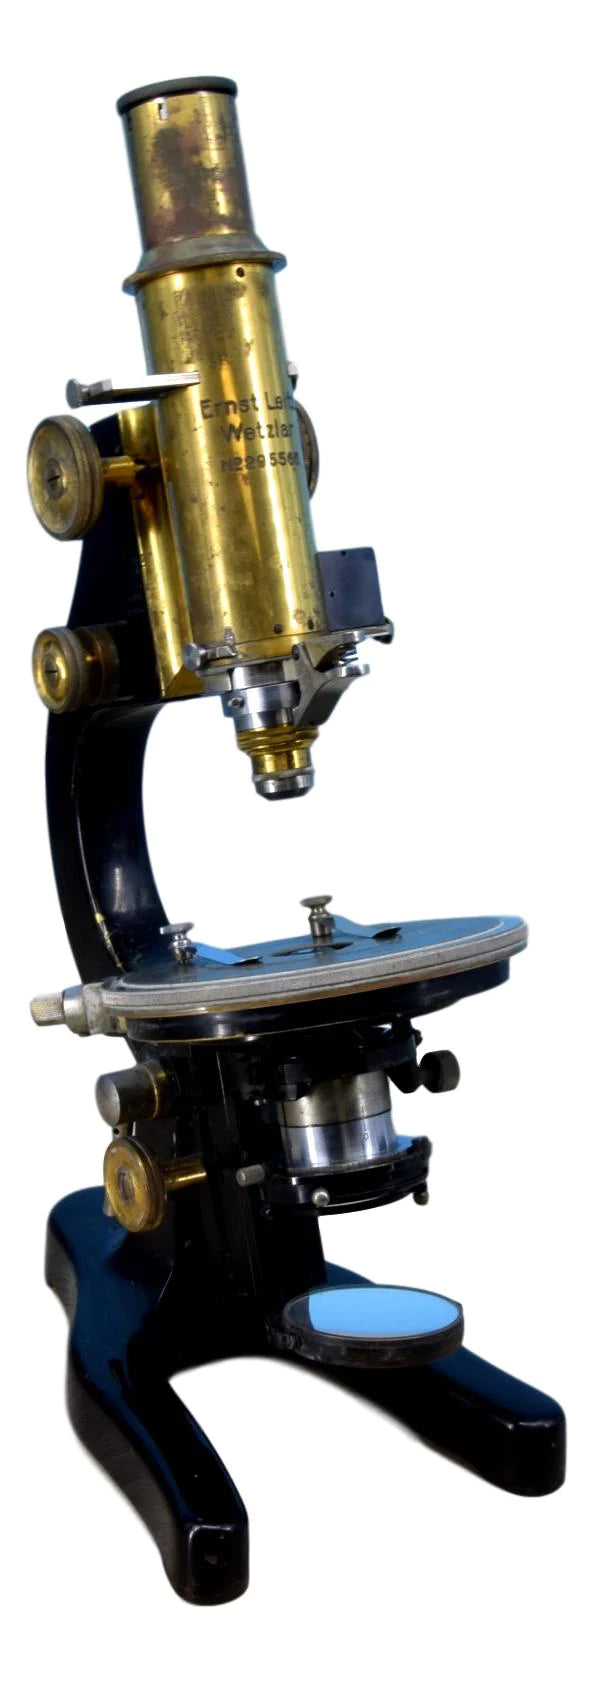 History of the Microscope by Century